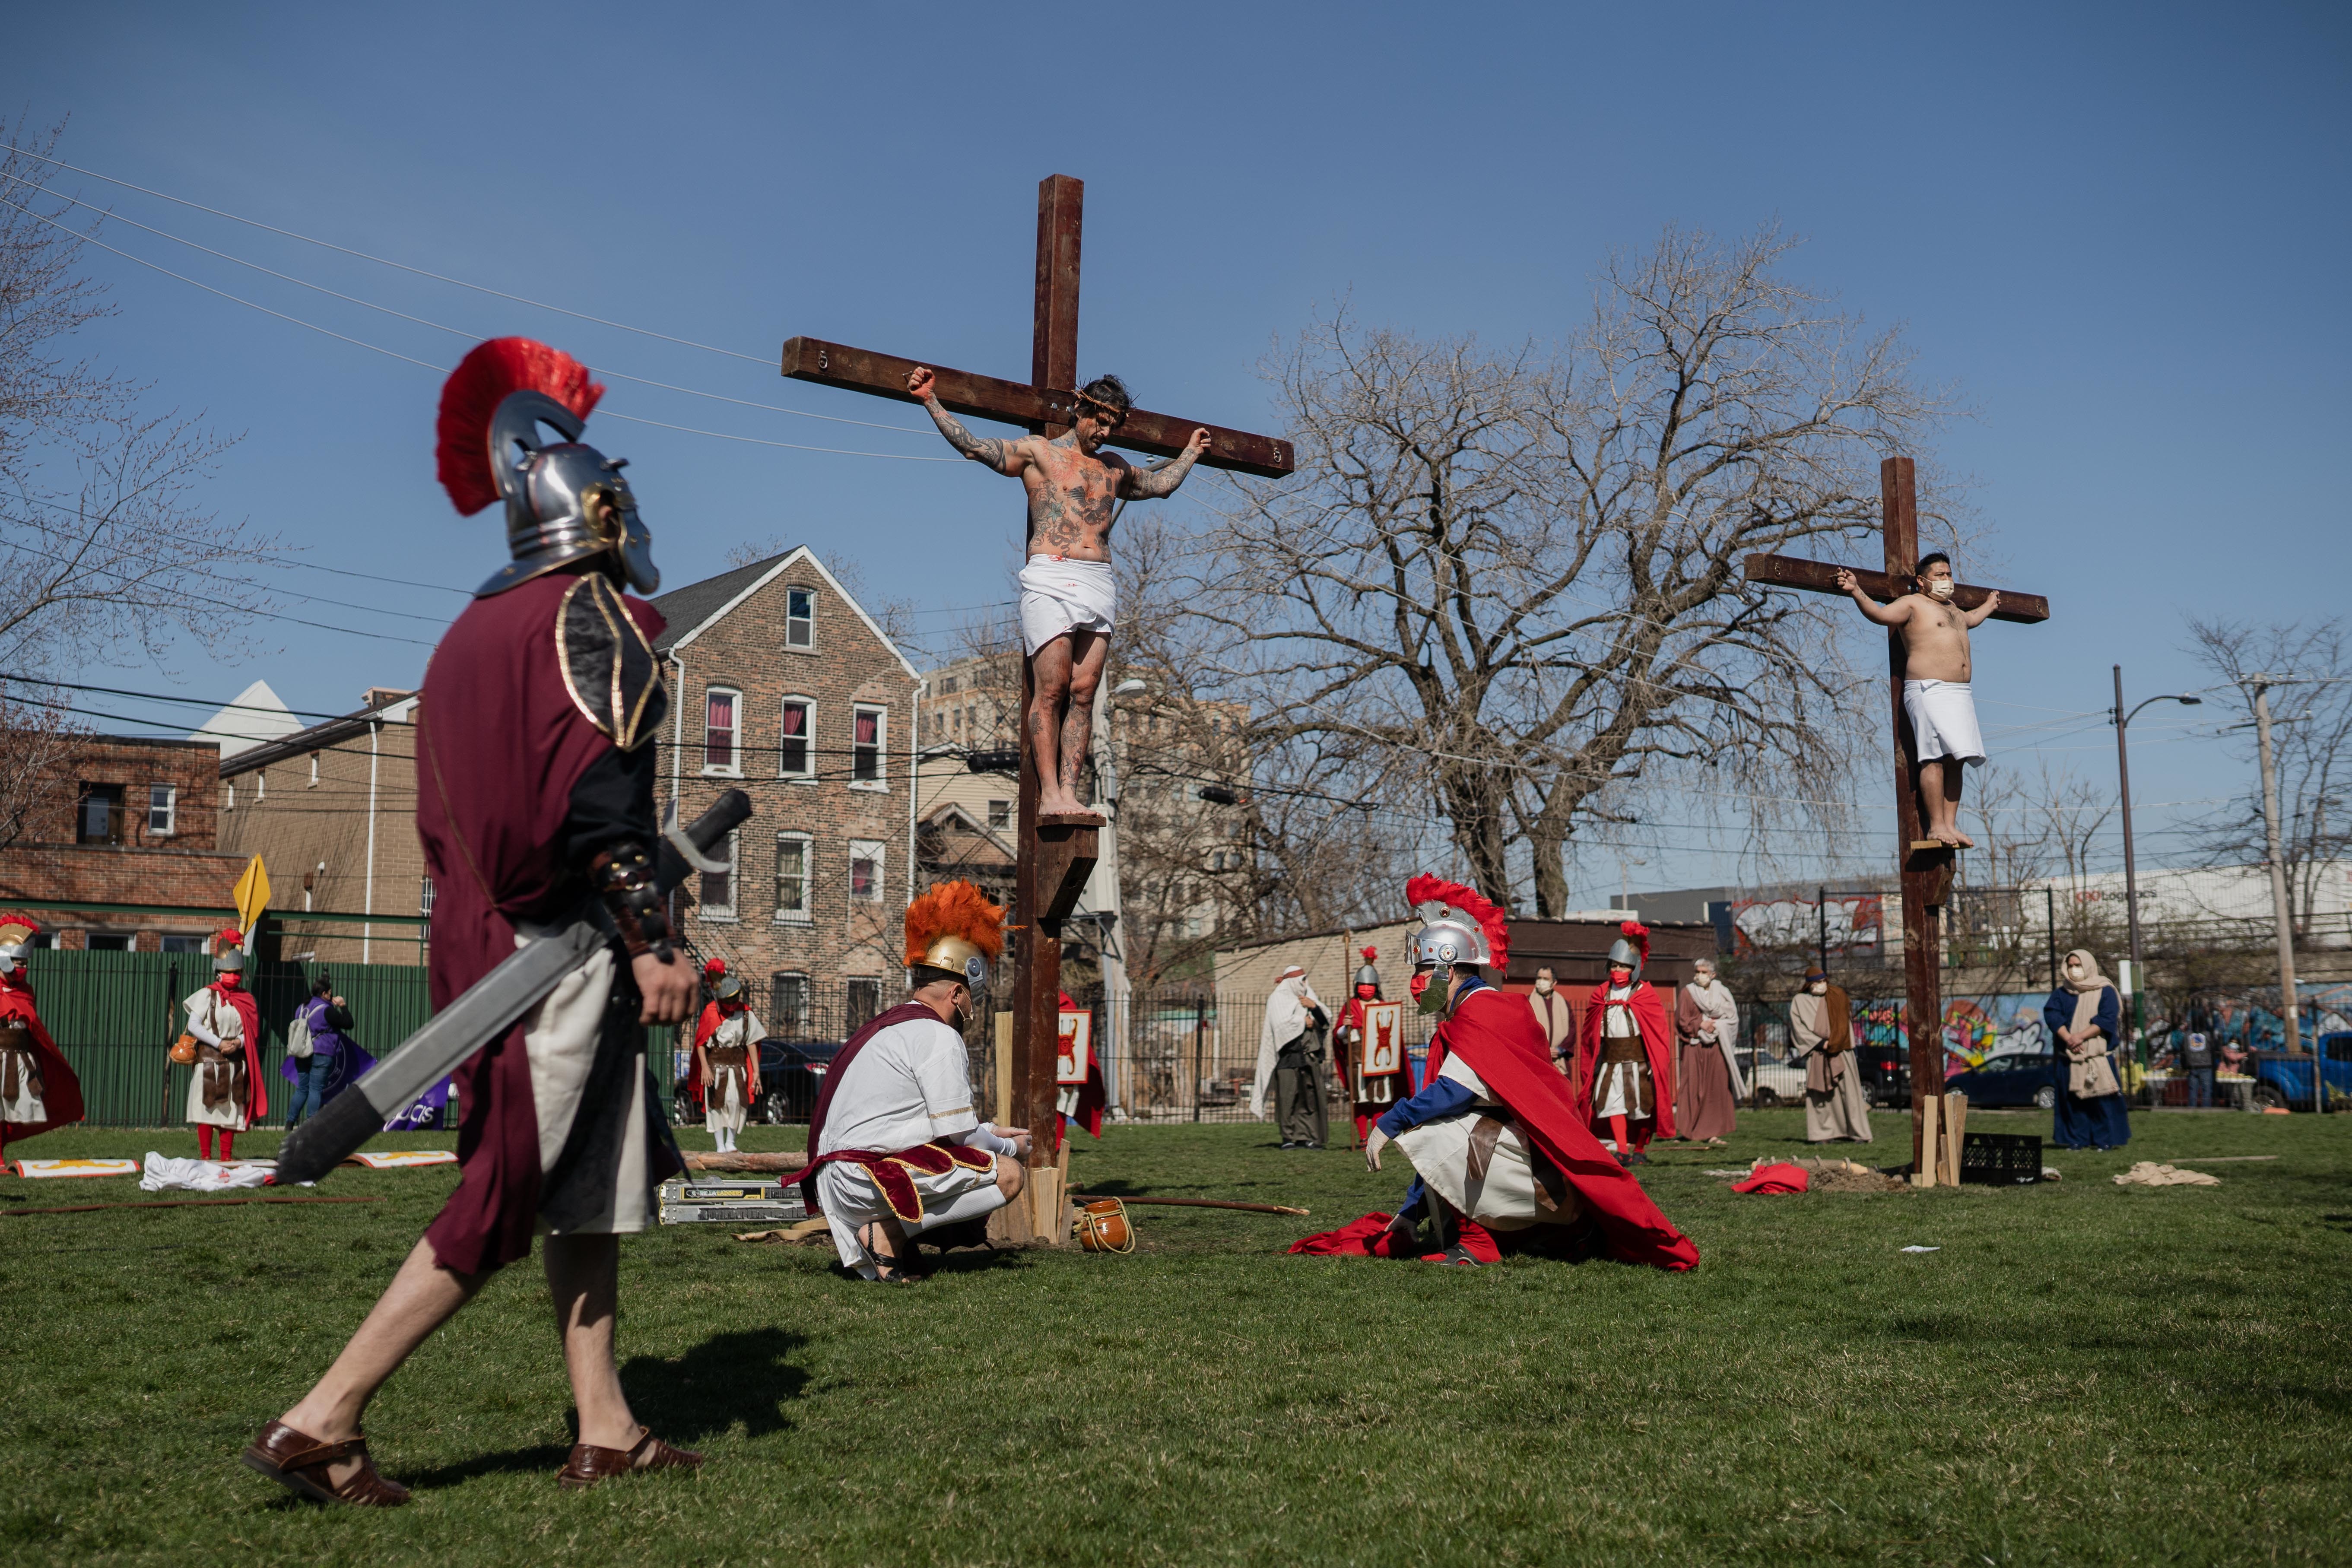 Isaac Bucio, who plays Jesus Christ, acts as if he is crucified during Via Crucis on the field of St. Procopius Catholic Church in Pilsen, Friday morning, April 2, 2021. The annual Via Crucis is a Good Friday tradition that reenacts the Stations of the Cross, a Catholic devotion that recounts Jesus’ passion and death.